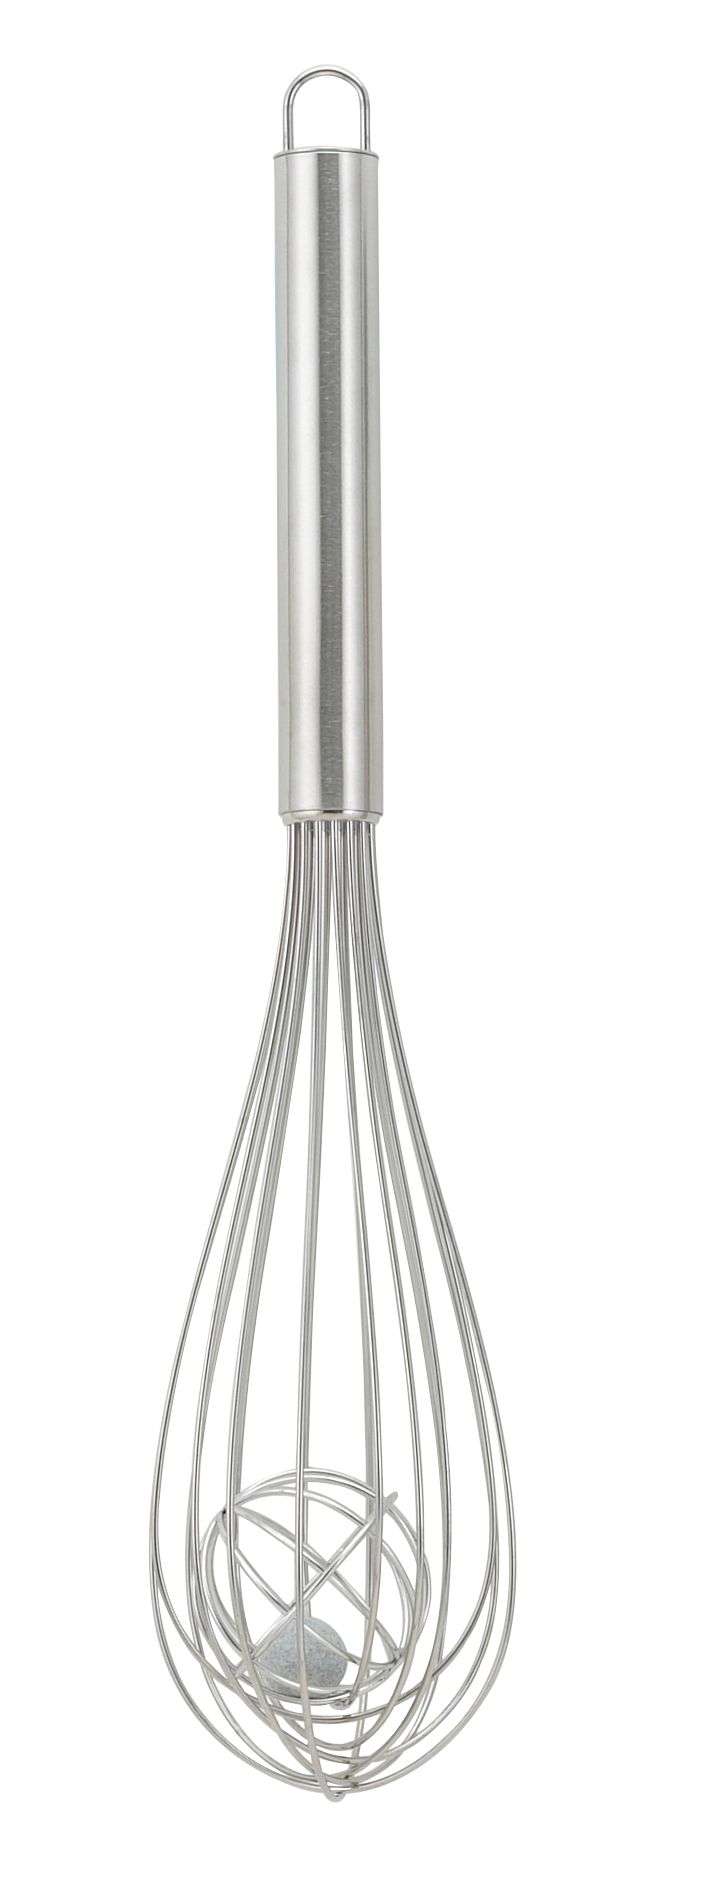 Whisk, Balloon With Ball, 12 Inch Baking Whisk an Essential Tool for Light Batters and Thick Sauces.